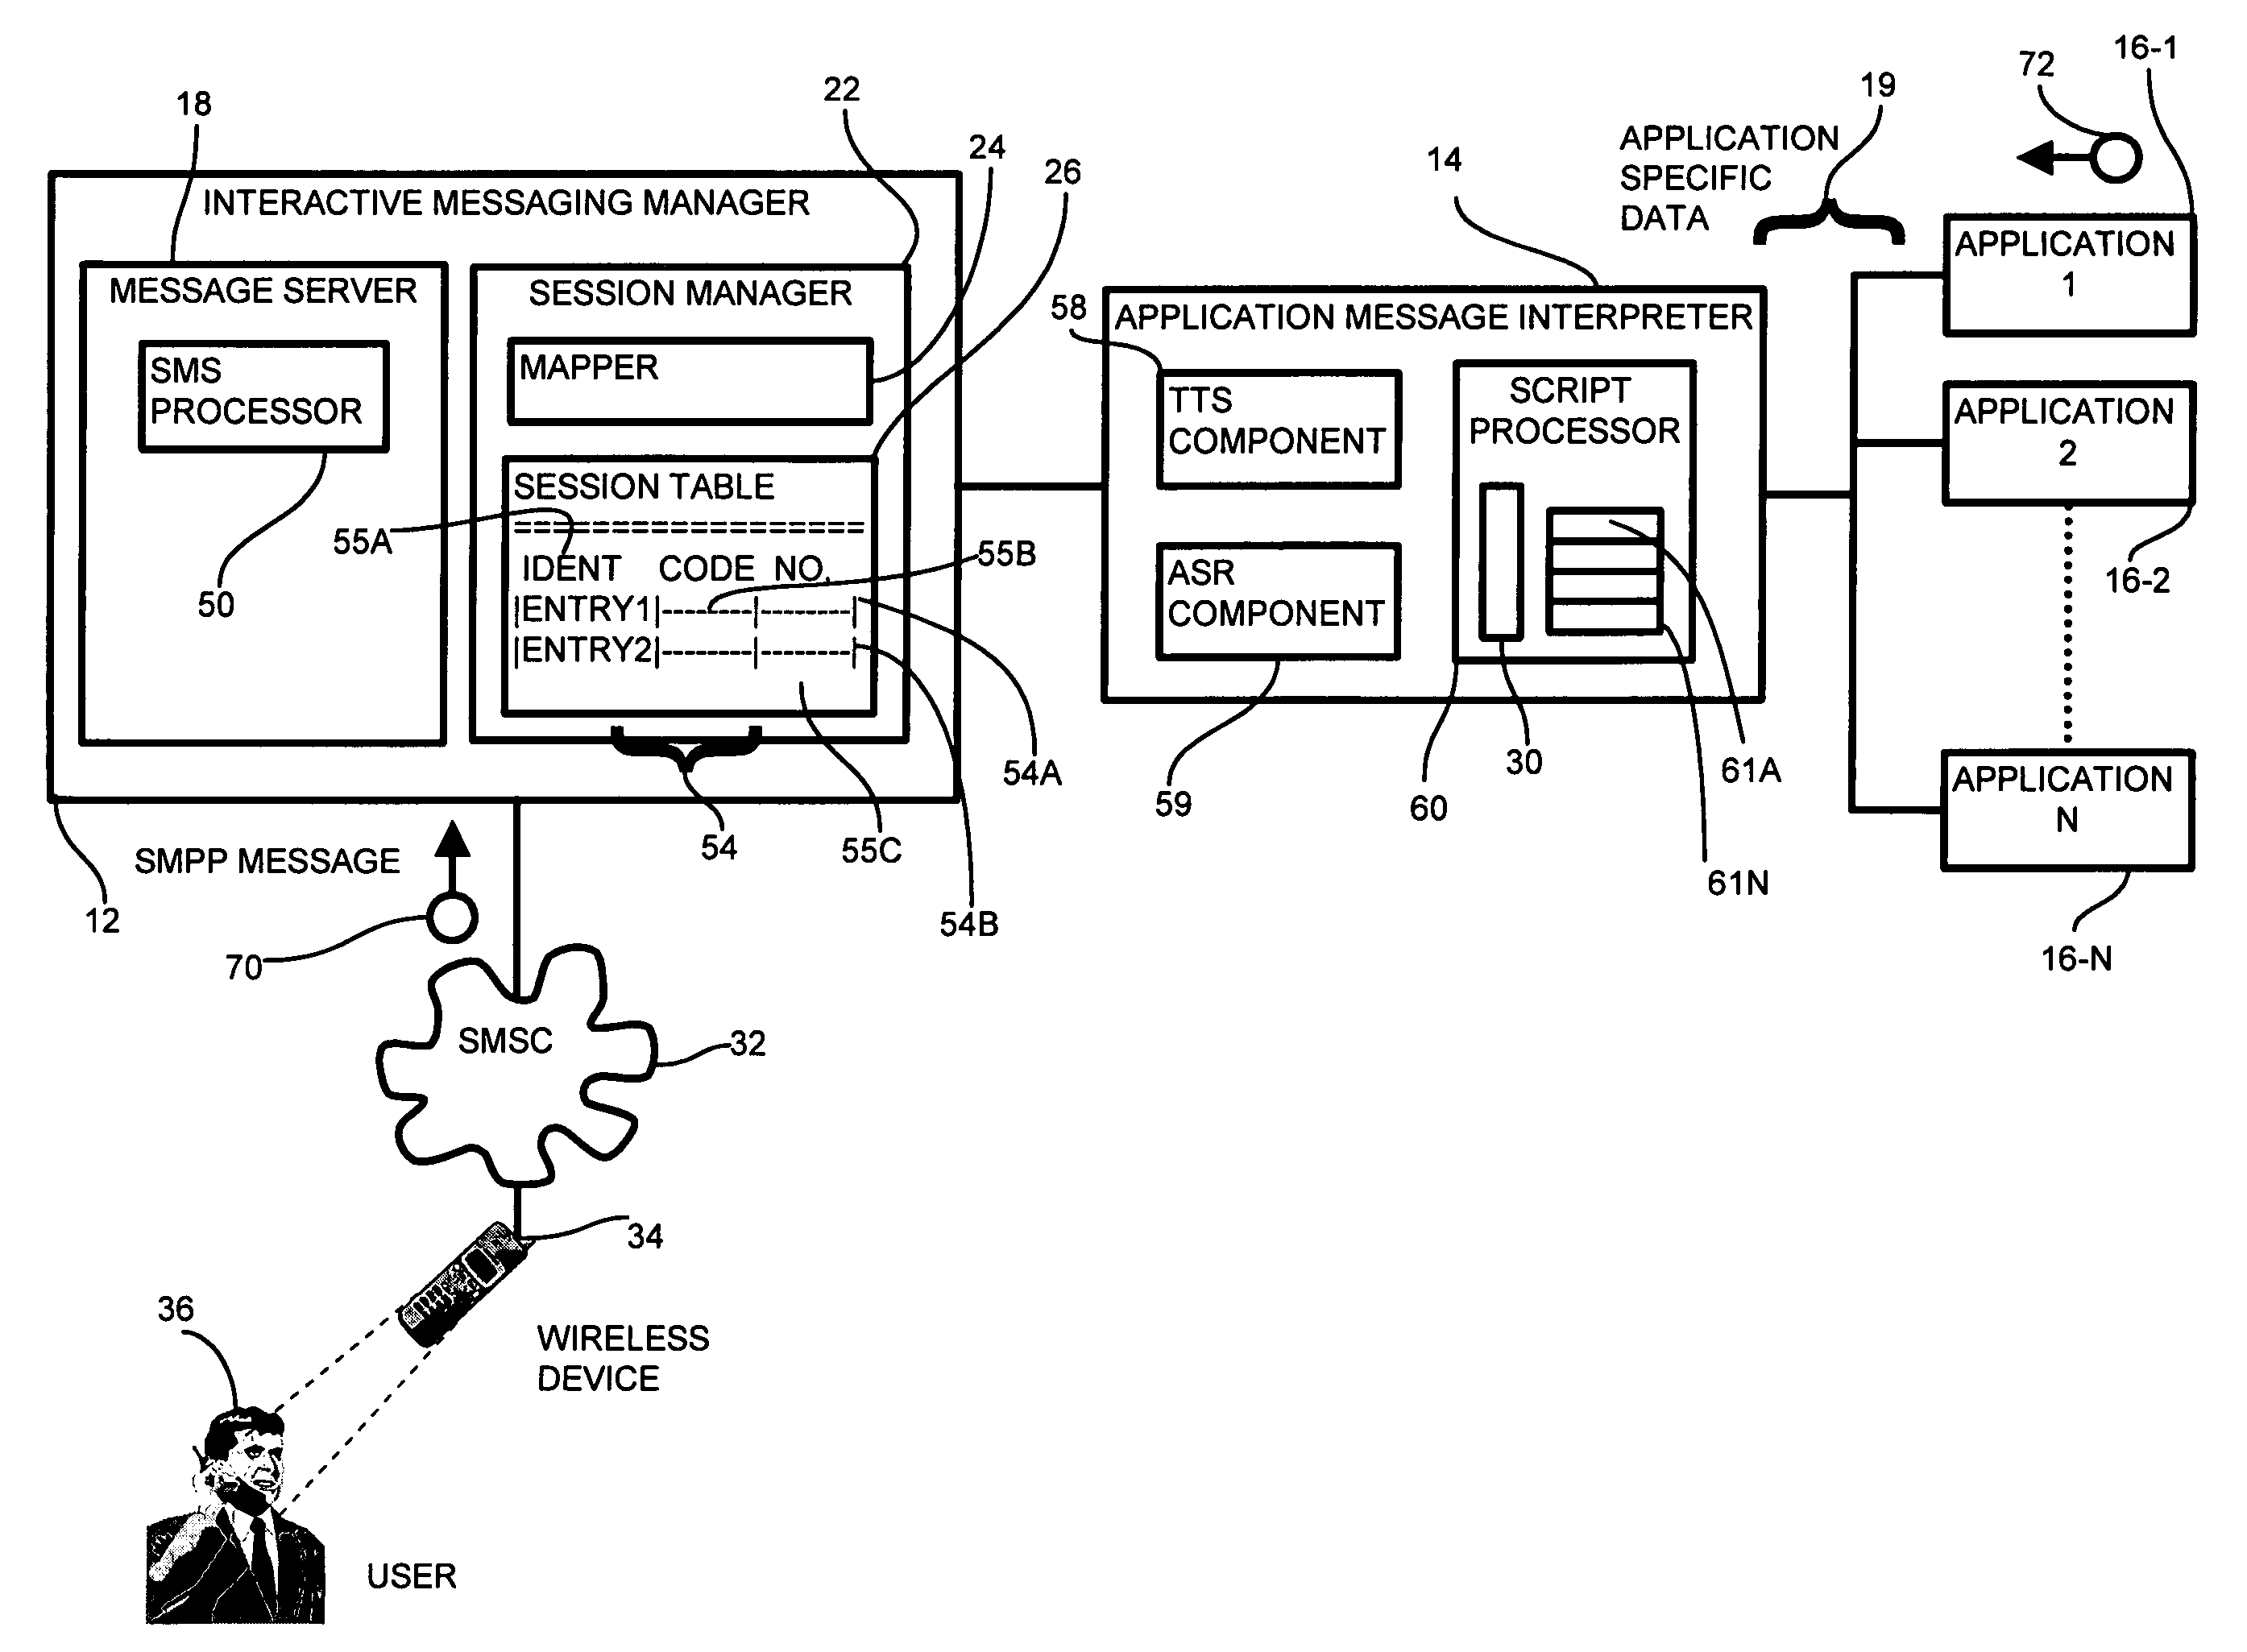 System and methods for controlling an application